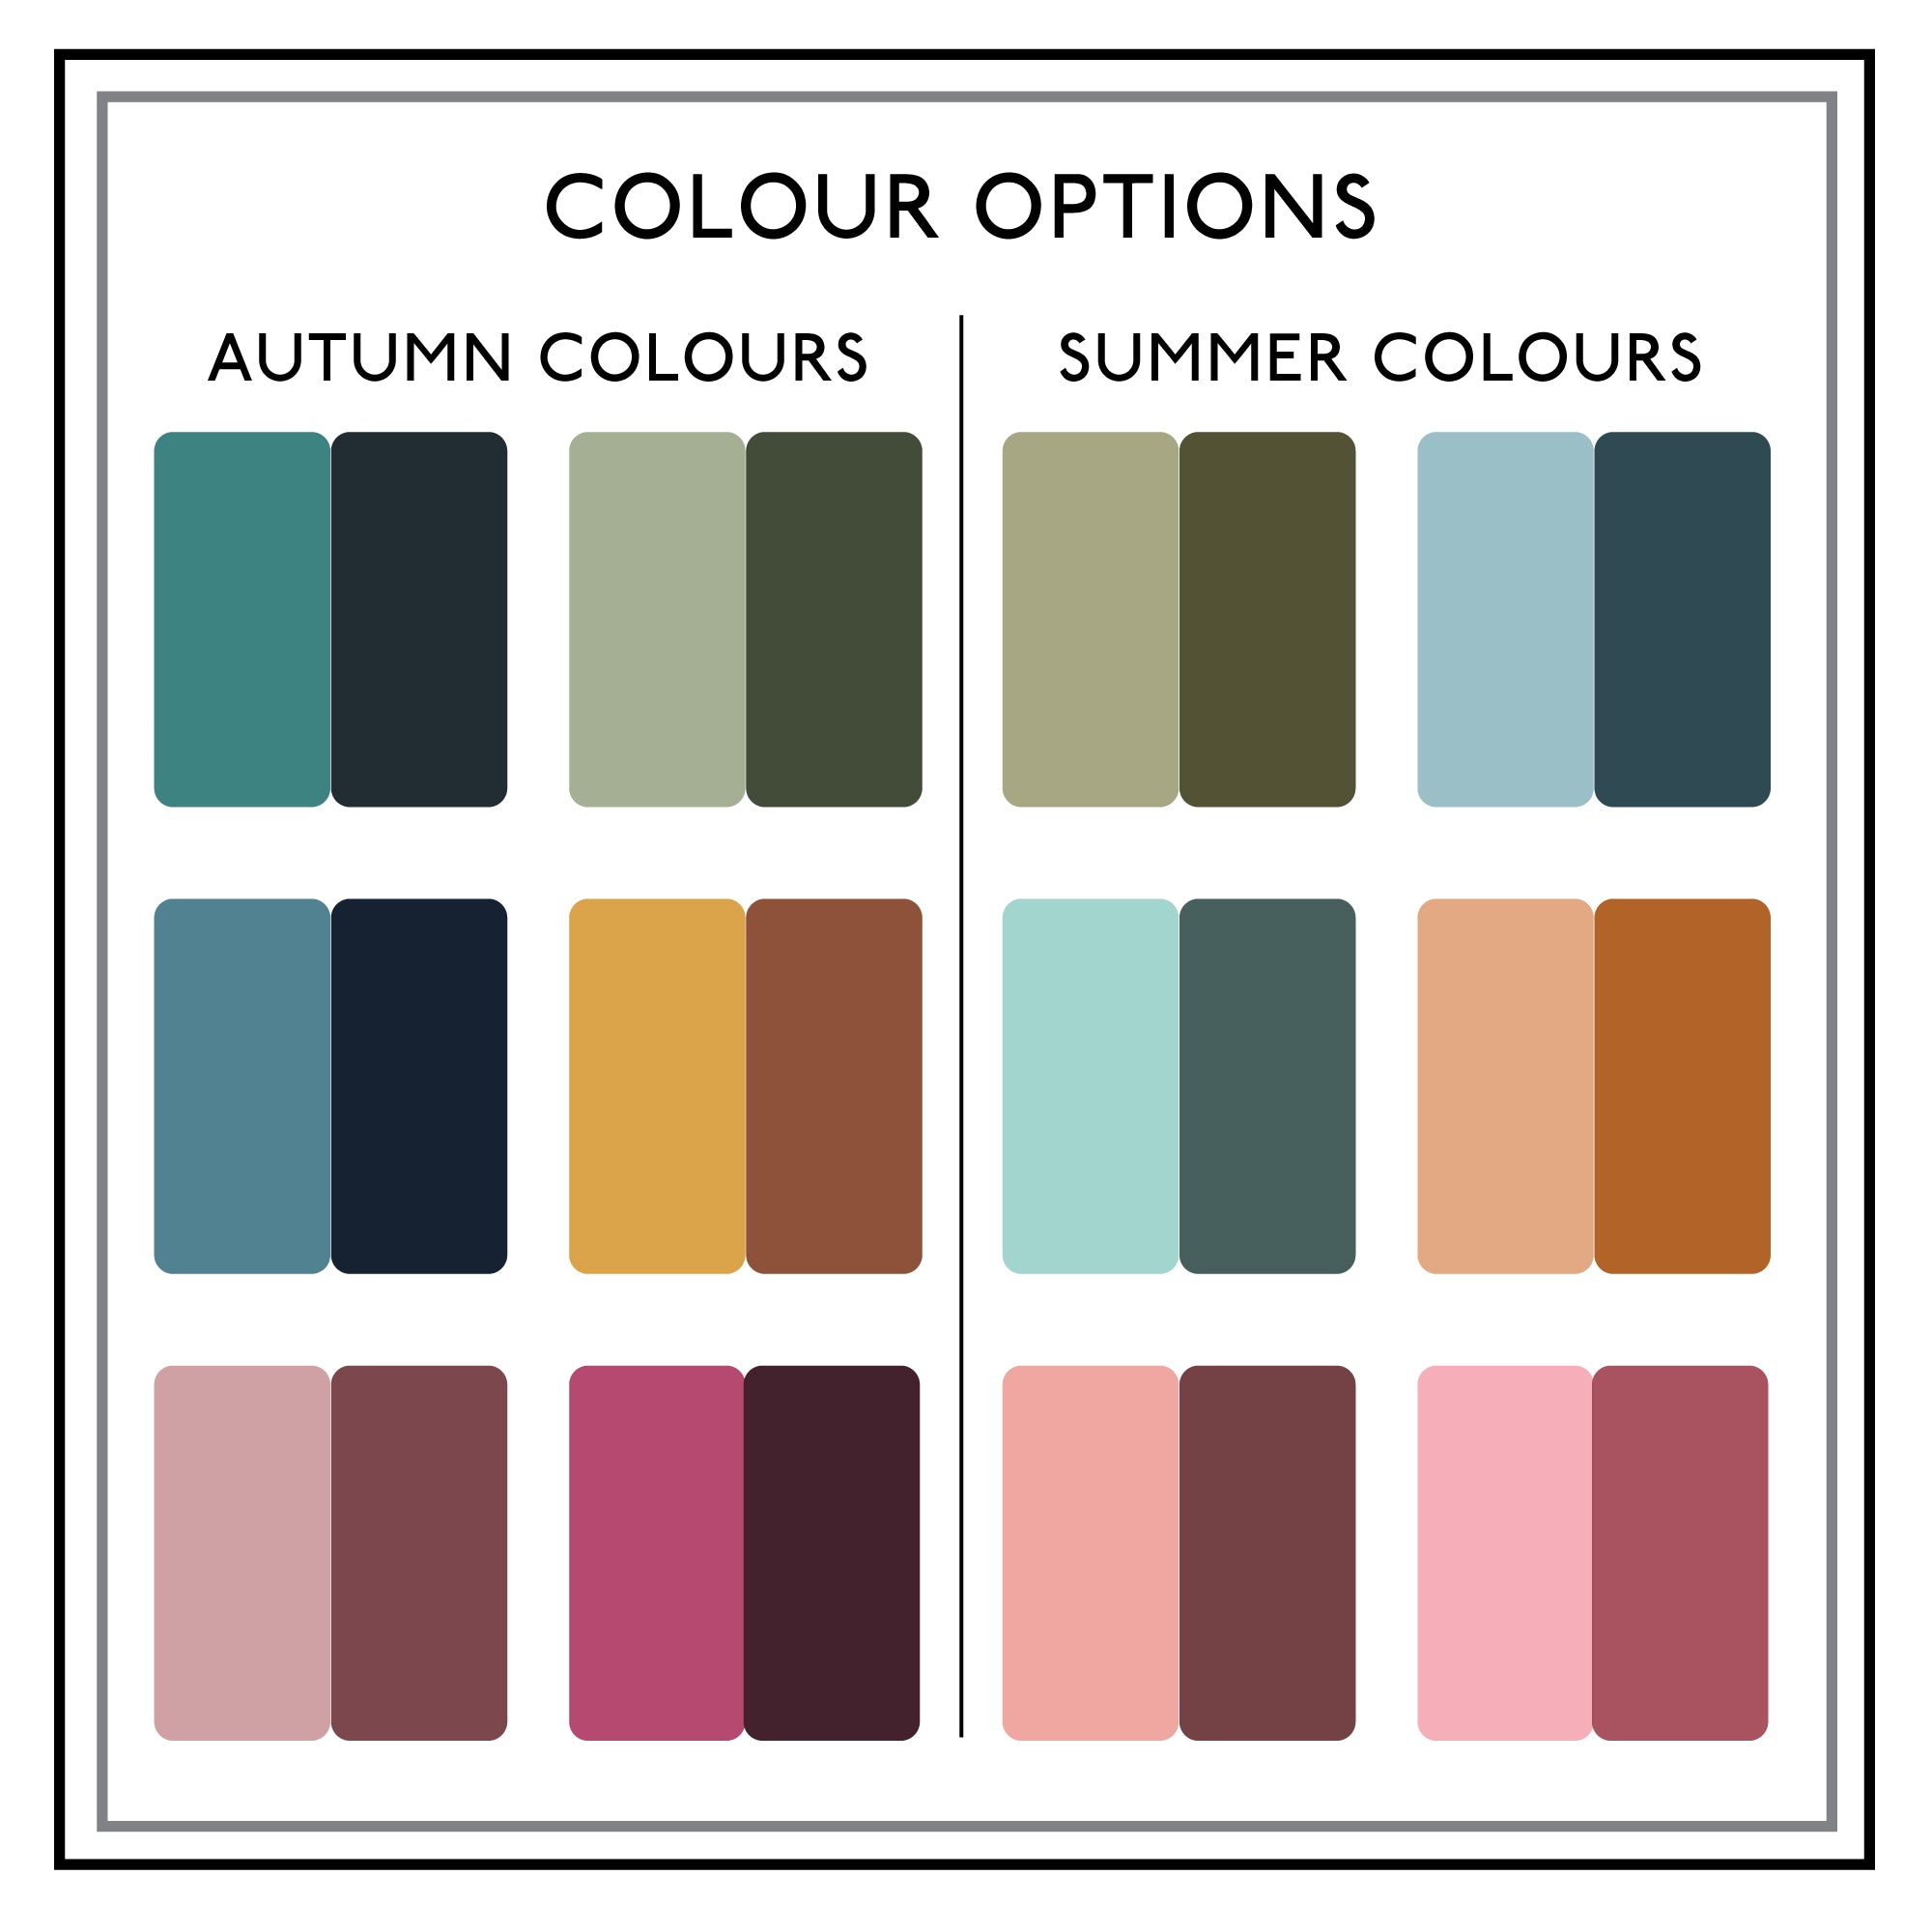 Colour chart showing the Autumn and summer colourways